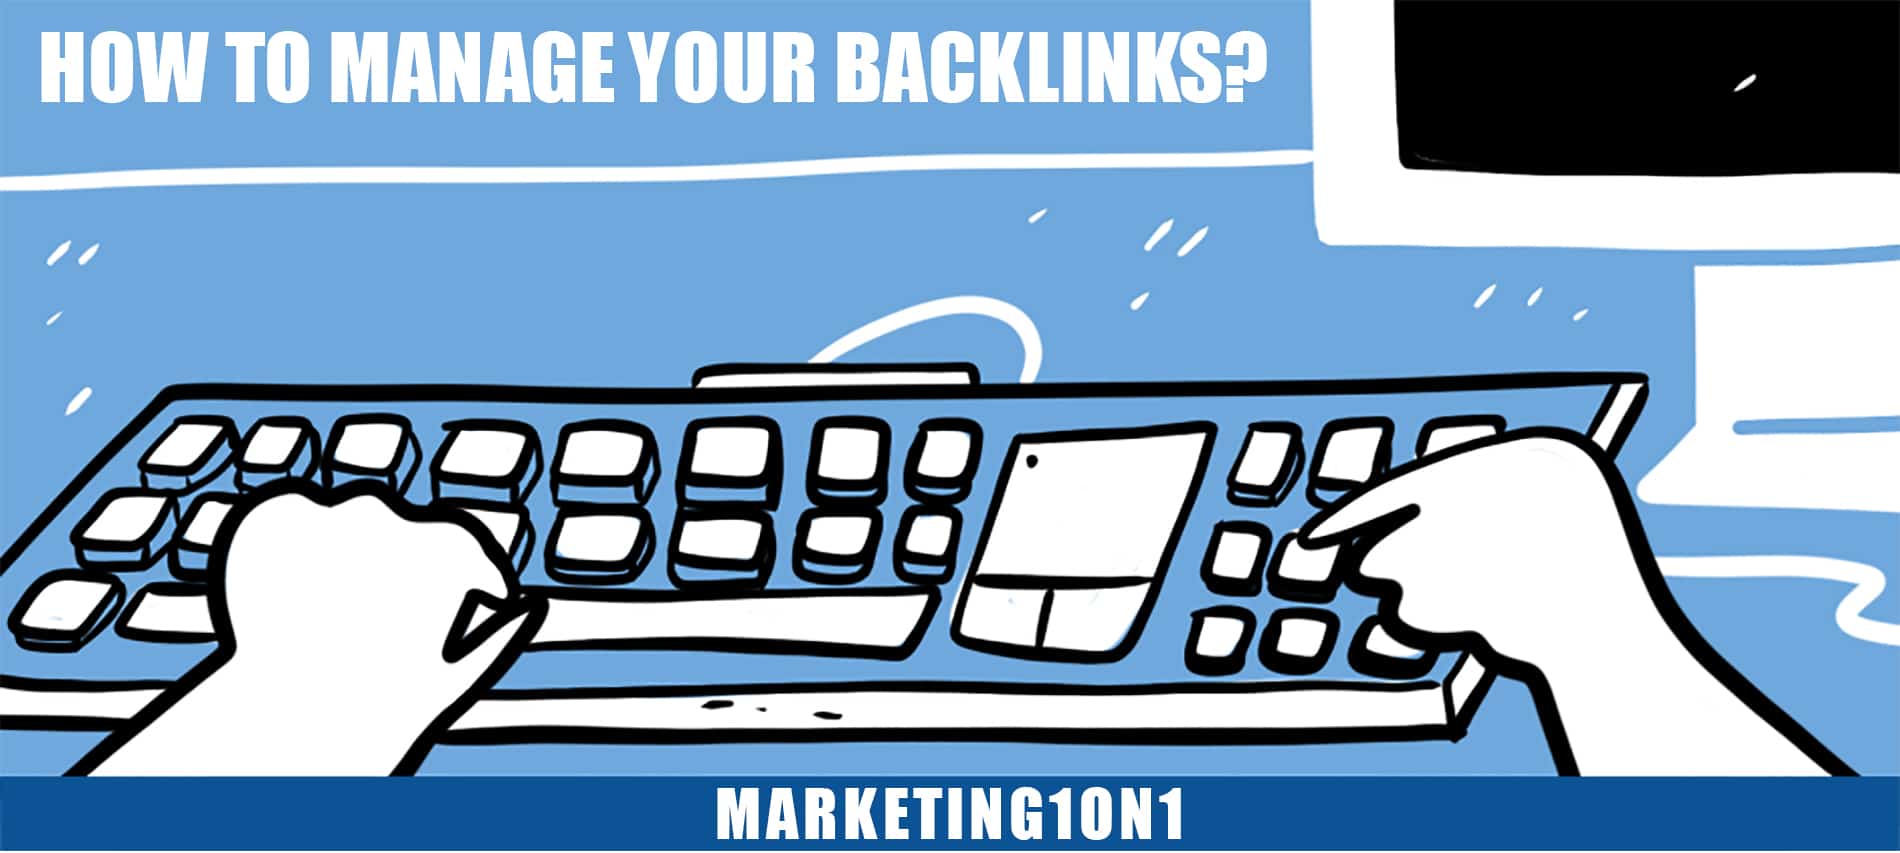 How to manage your backlinks?